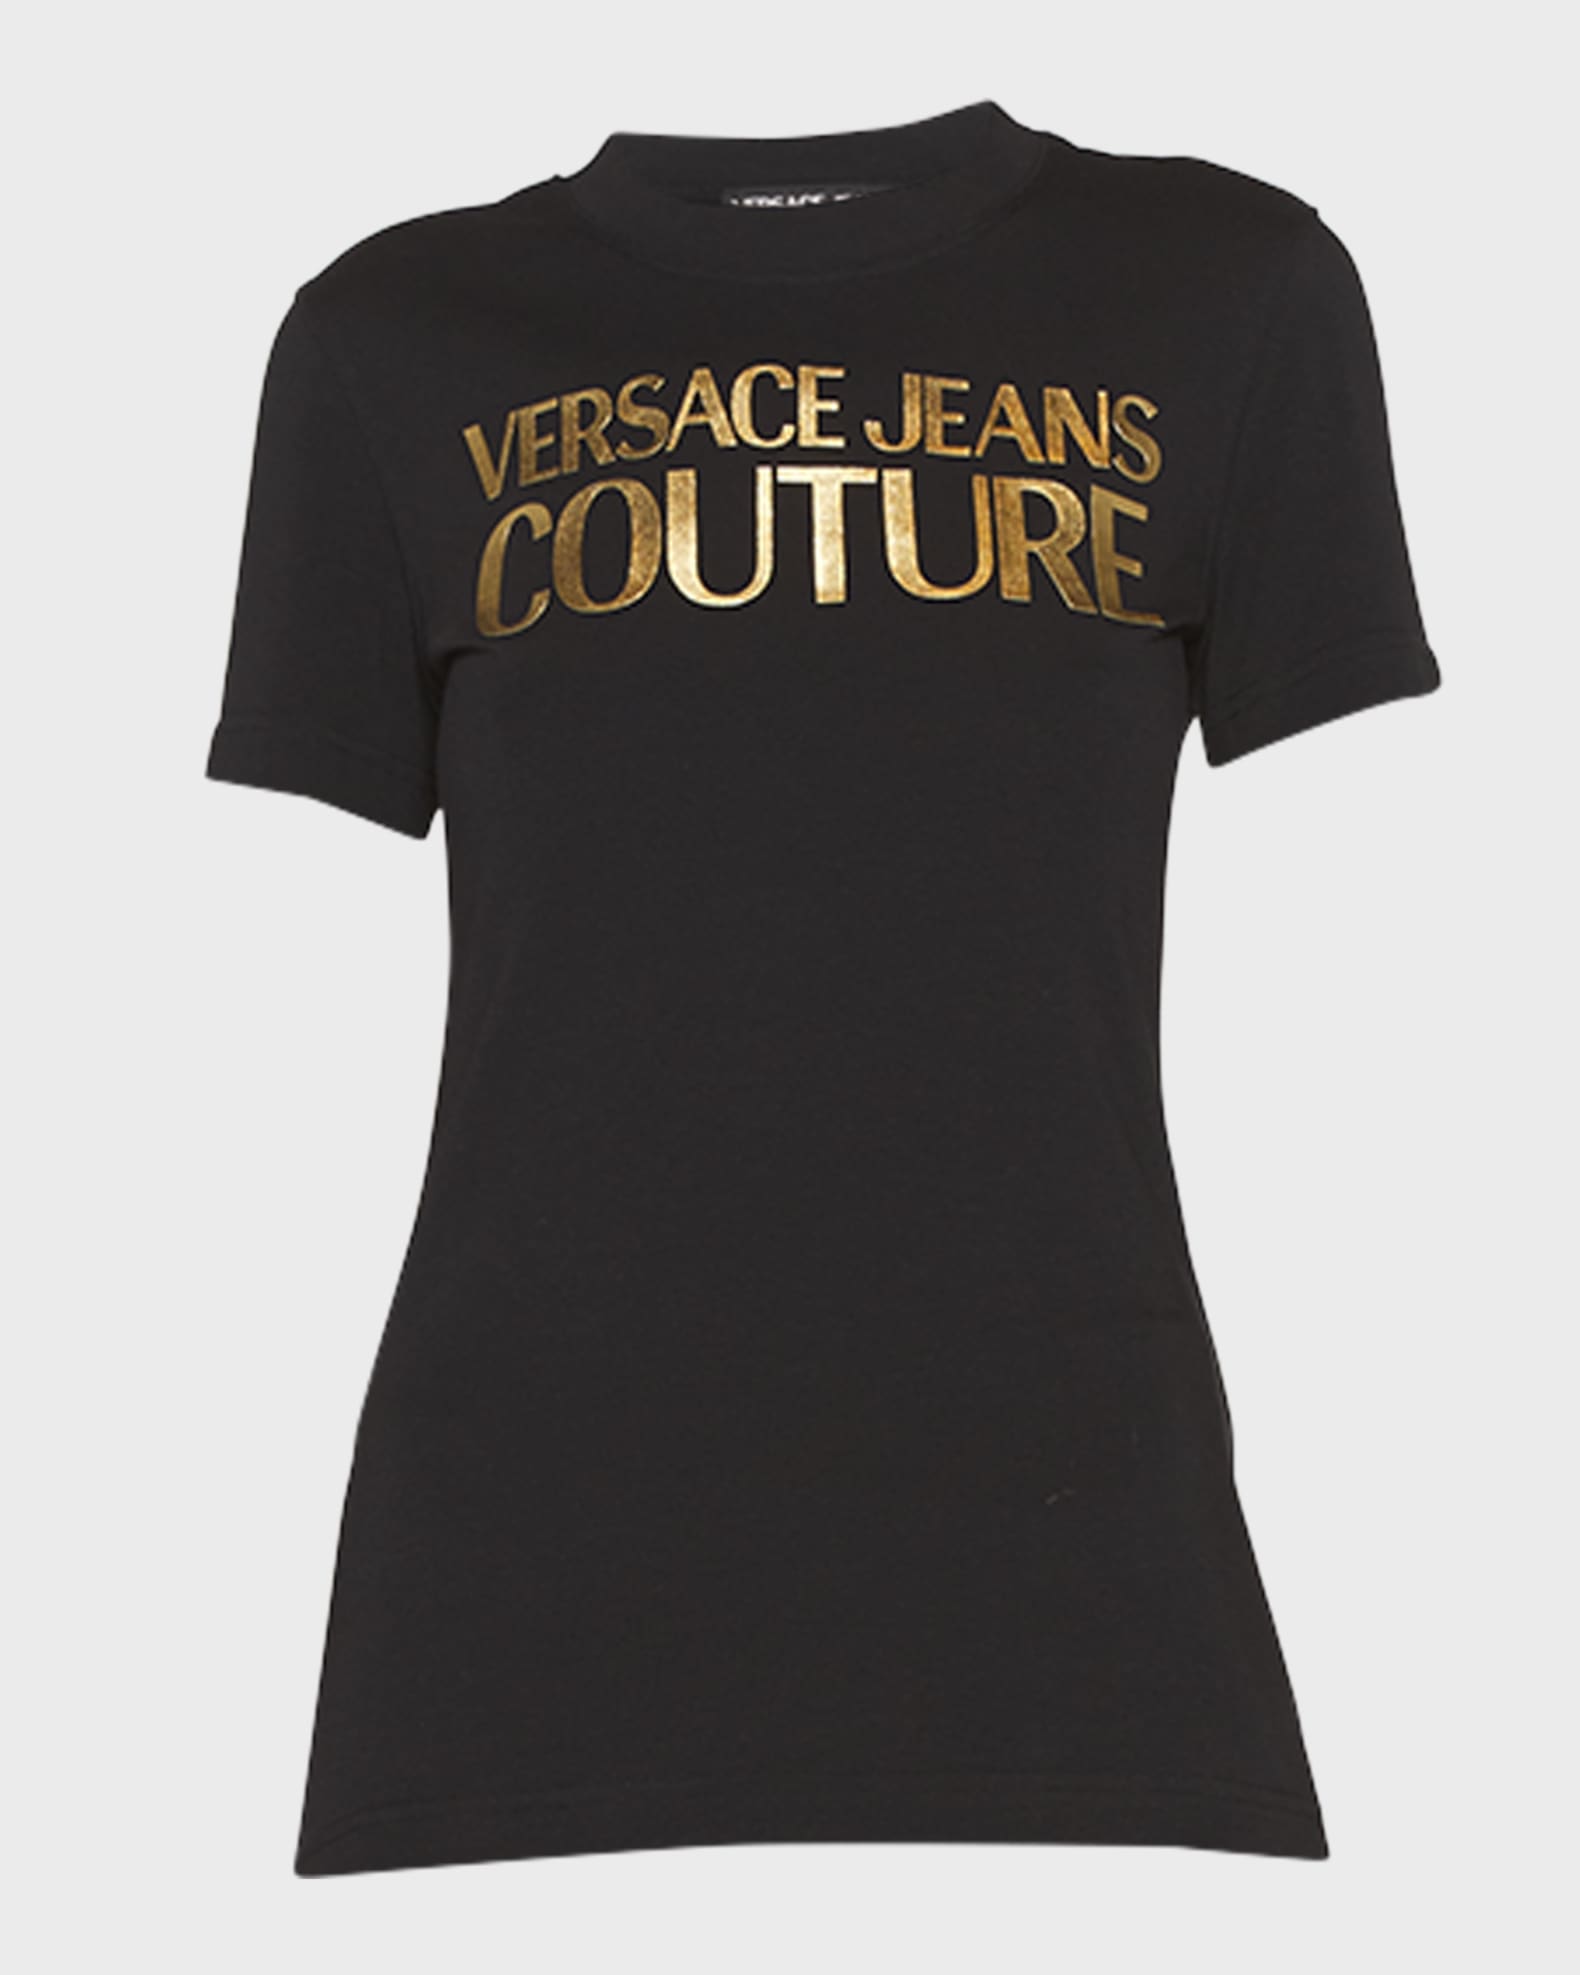 Versace Jeans Couture Institutional Logo Tee | Neiman Marcus